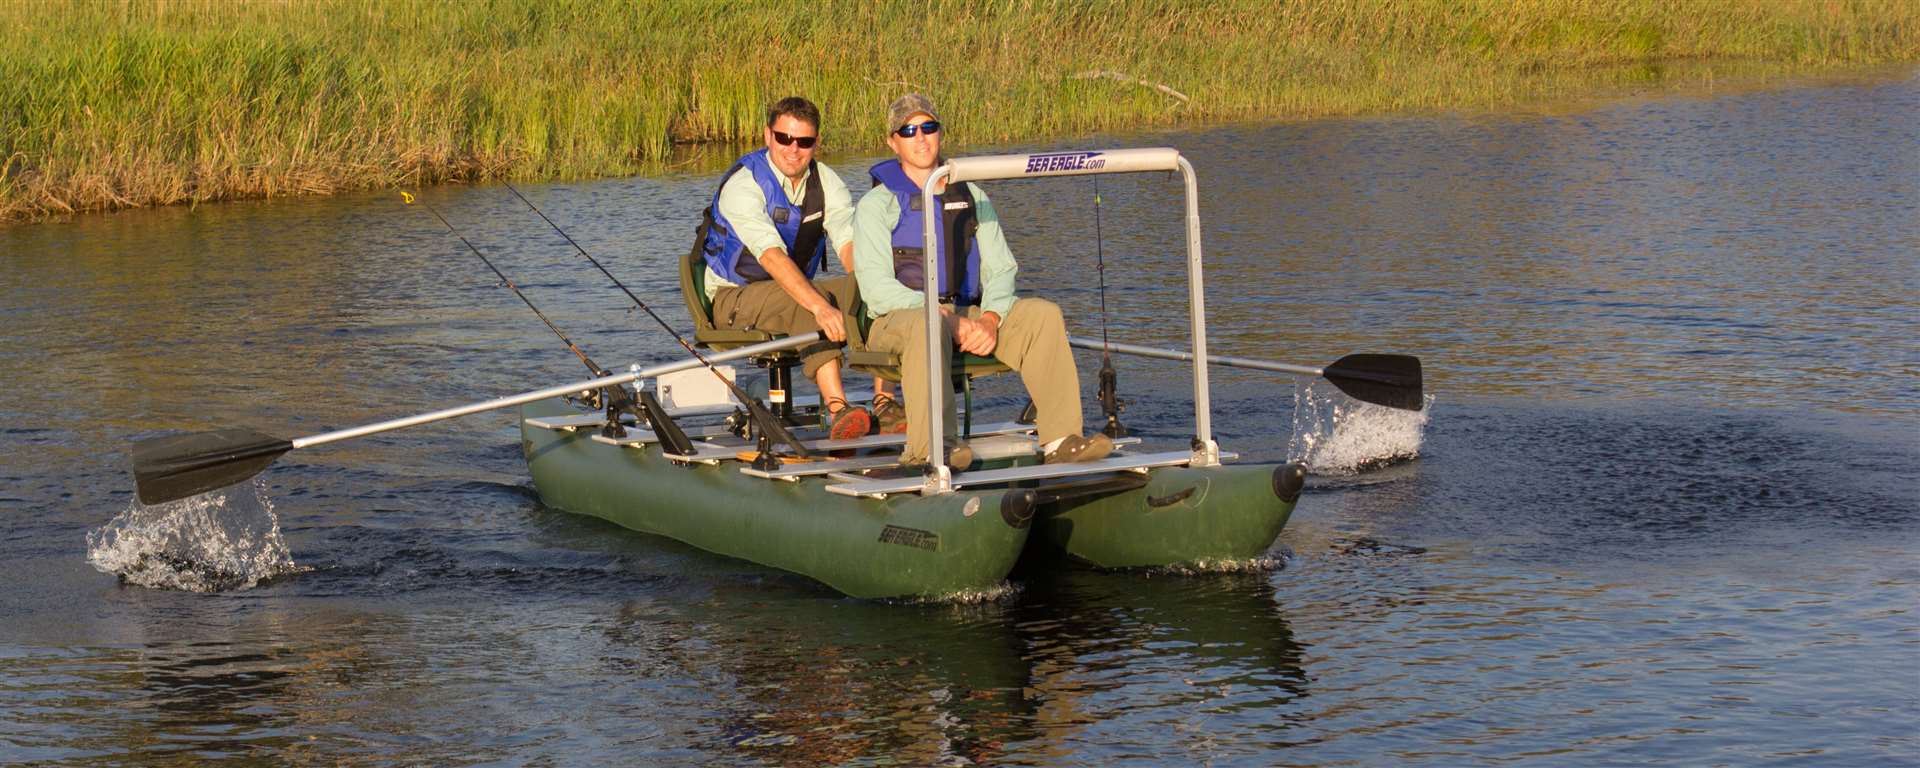 Sea Eagle 375FC FoldCat Inflatable Fishing Boat, Pro Angler Guide Package